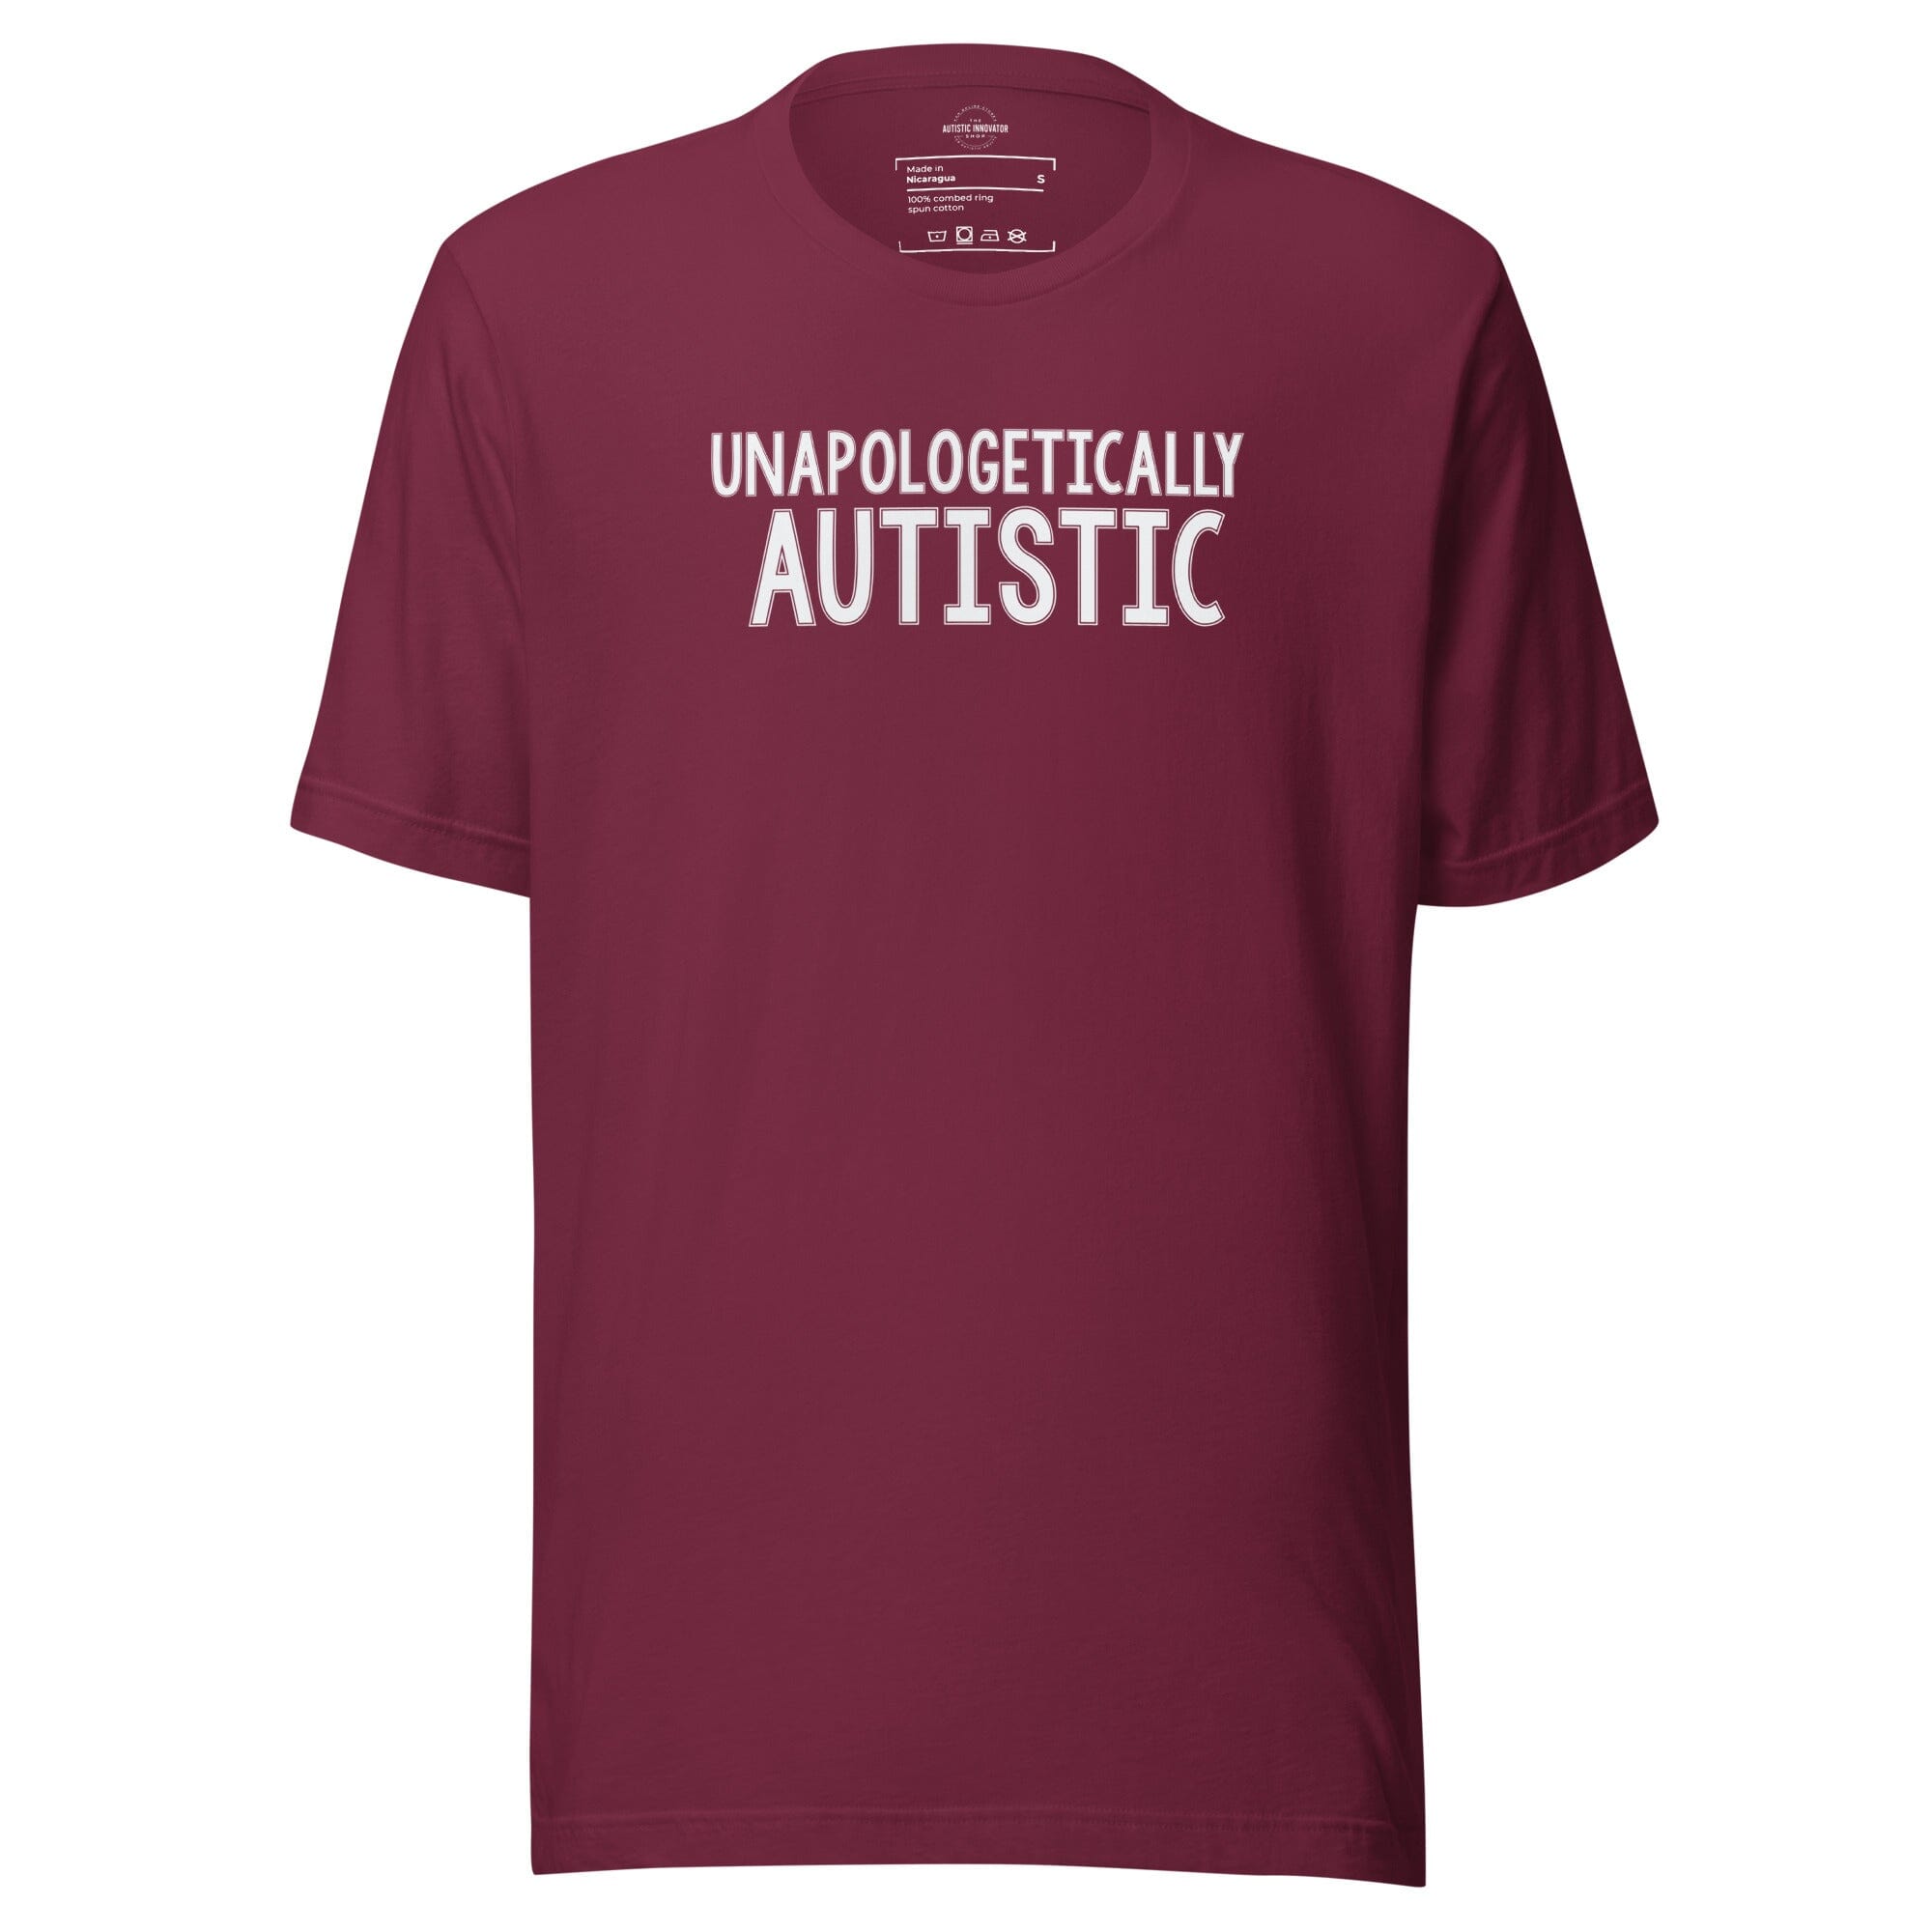 Unapologetically Autistic Unisex t-shirt The Autistic Innovator Maroon S 